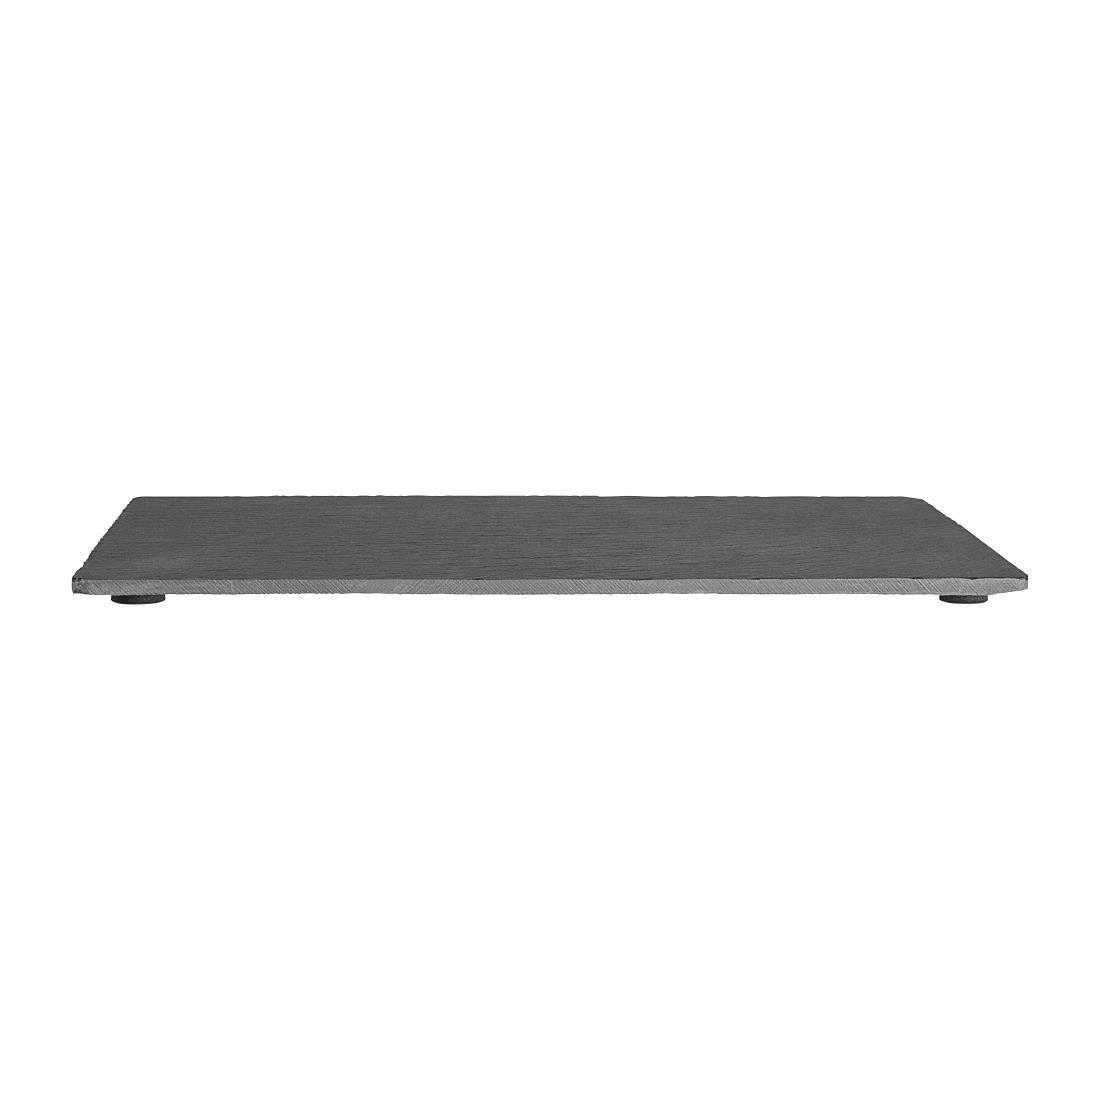 Olympia Smooth Edged Slate Platters 280 x 180mm (Pack of 2) - CM063  - 3